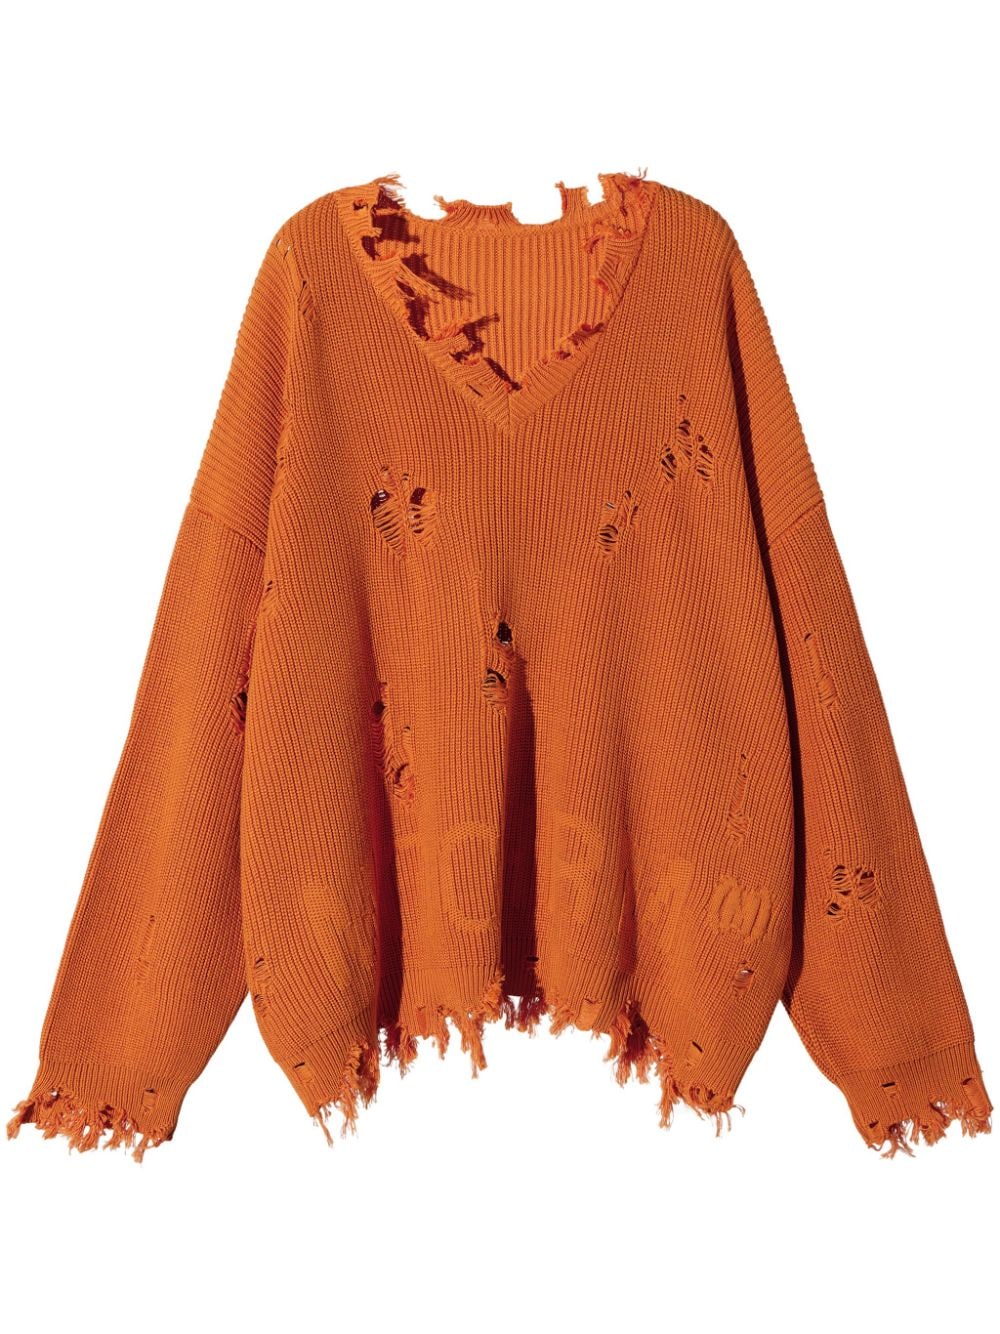 Gipsy distressed jumper